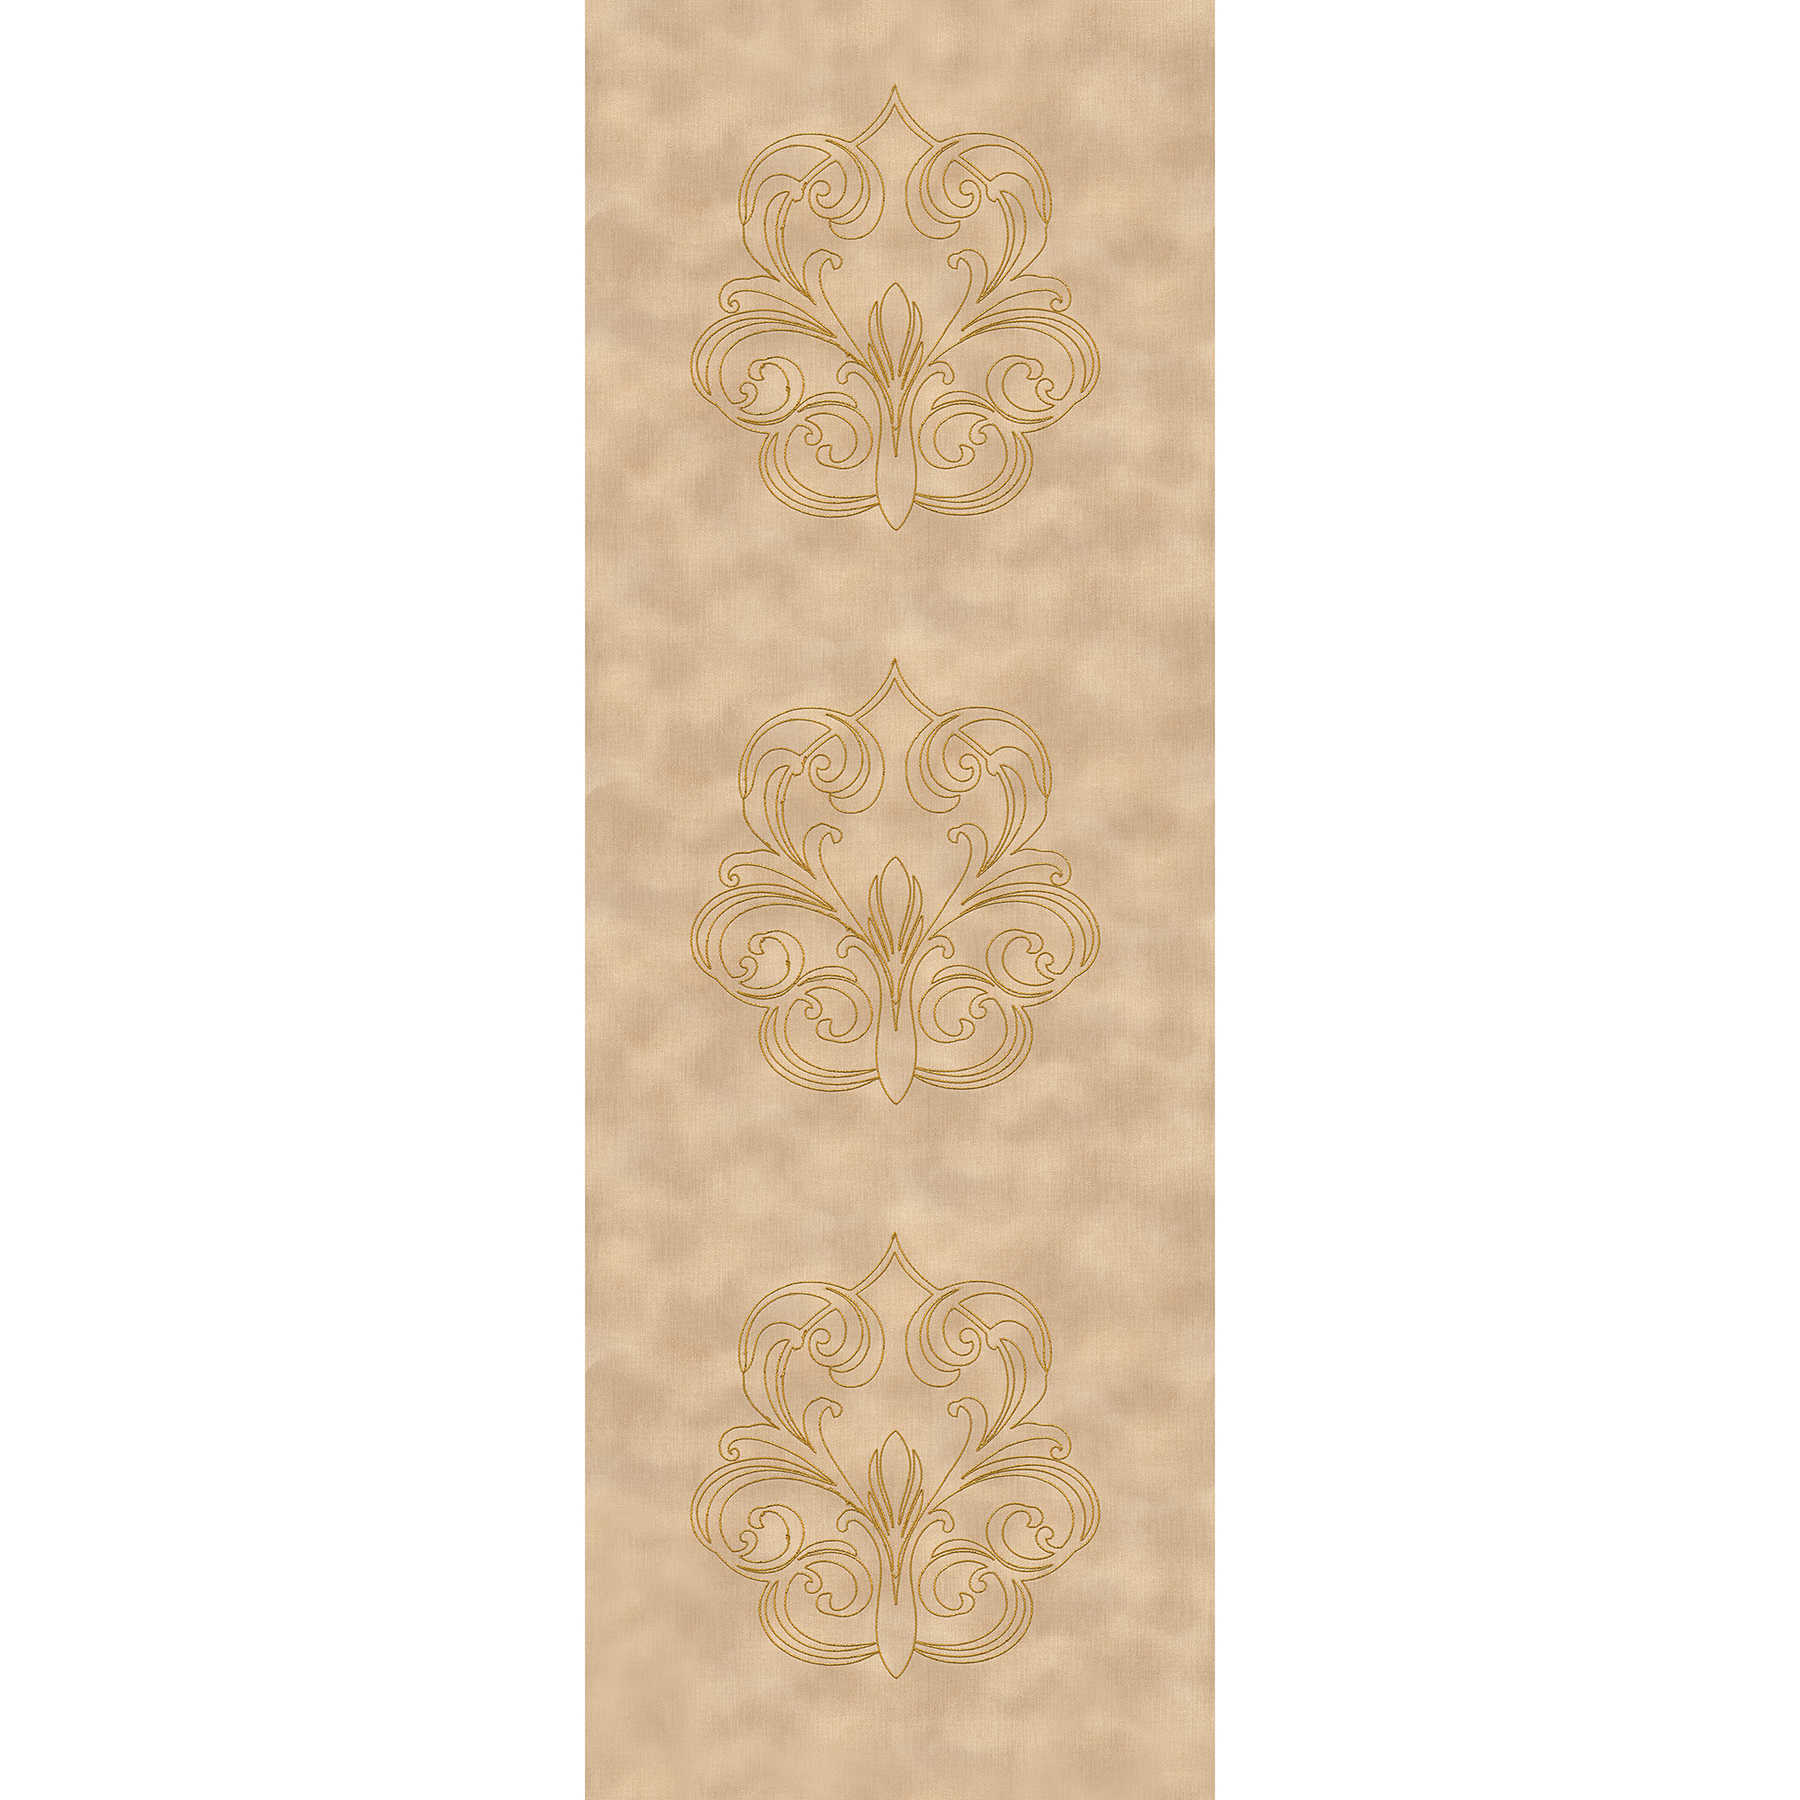         Ornament Premium Panels in Classic Baroque Style - Brown, Gold
    